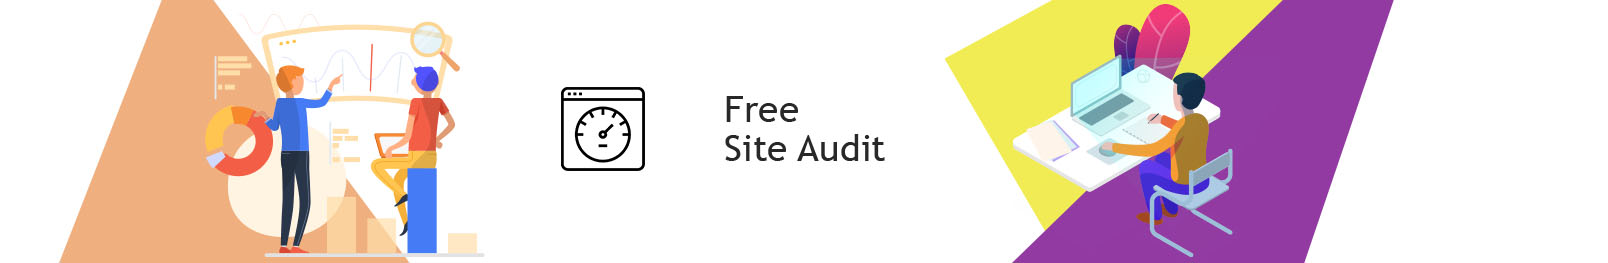 Site audit. Order an audit of the site. Order technical audit of the site.